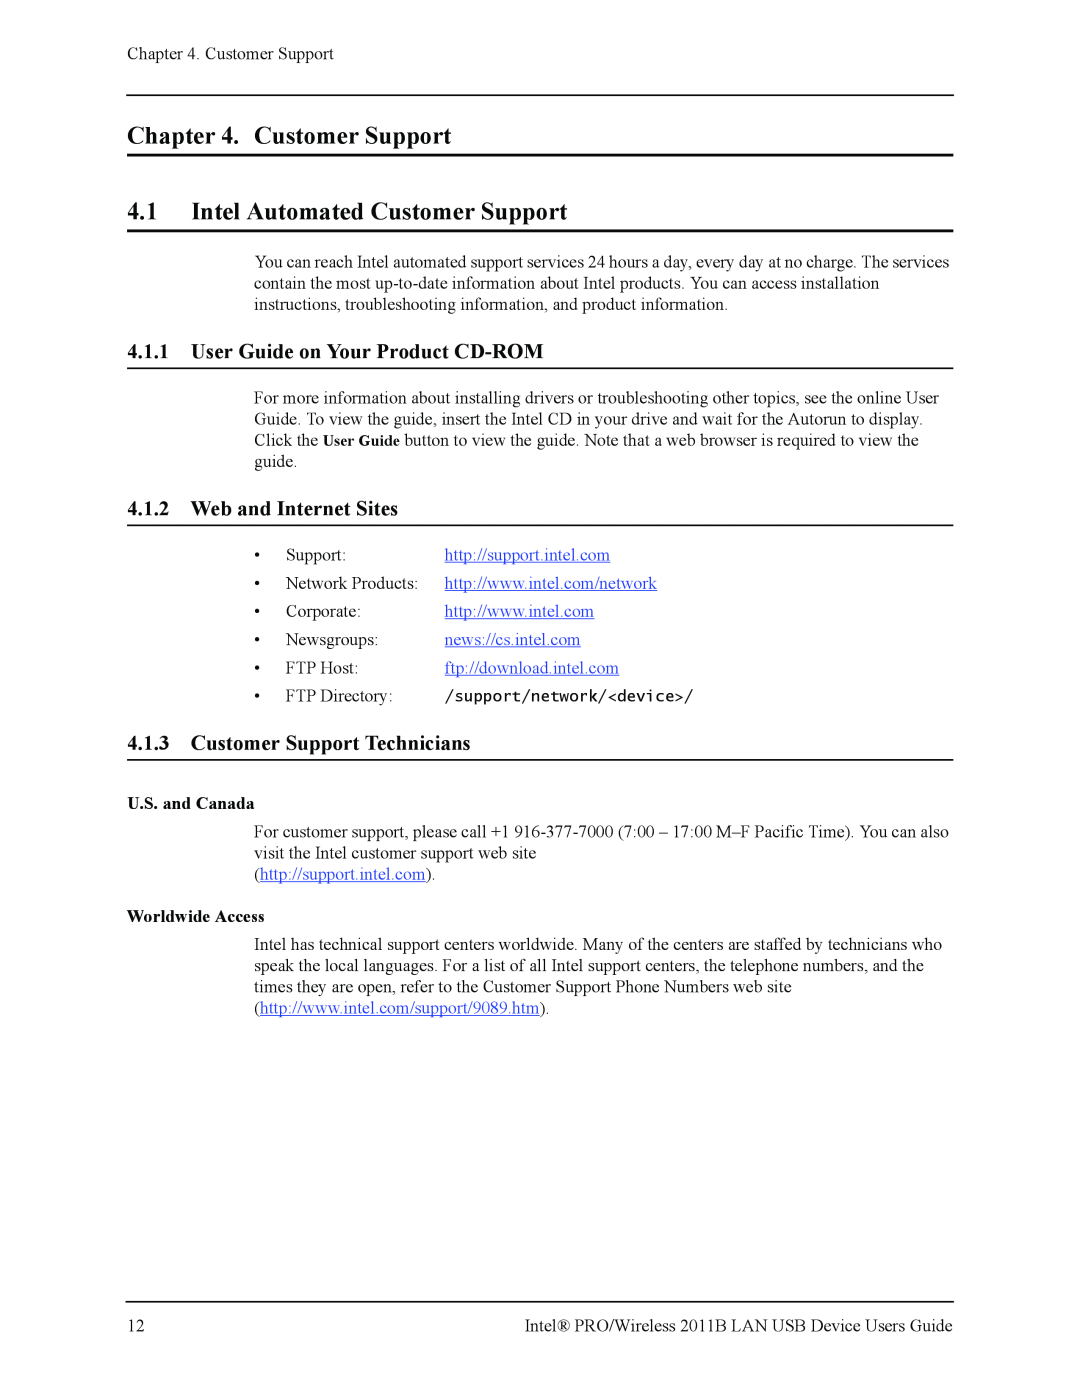 Intel 2011B 4.1Intel Automated Customer Support, 4.1.1User Guide on Your Product CD-ROM, 4.1.2Web and Internet Sites 